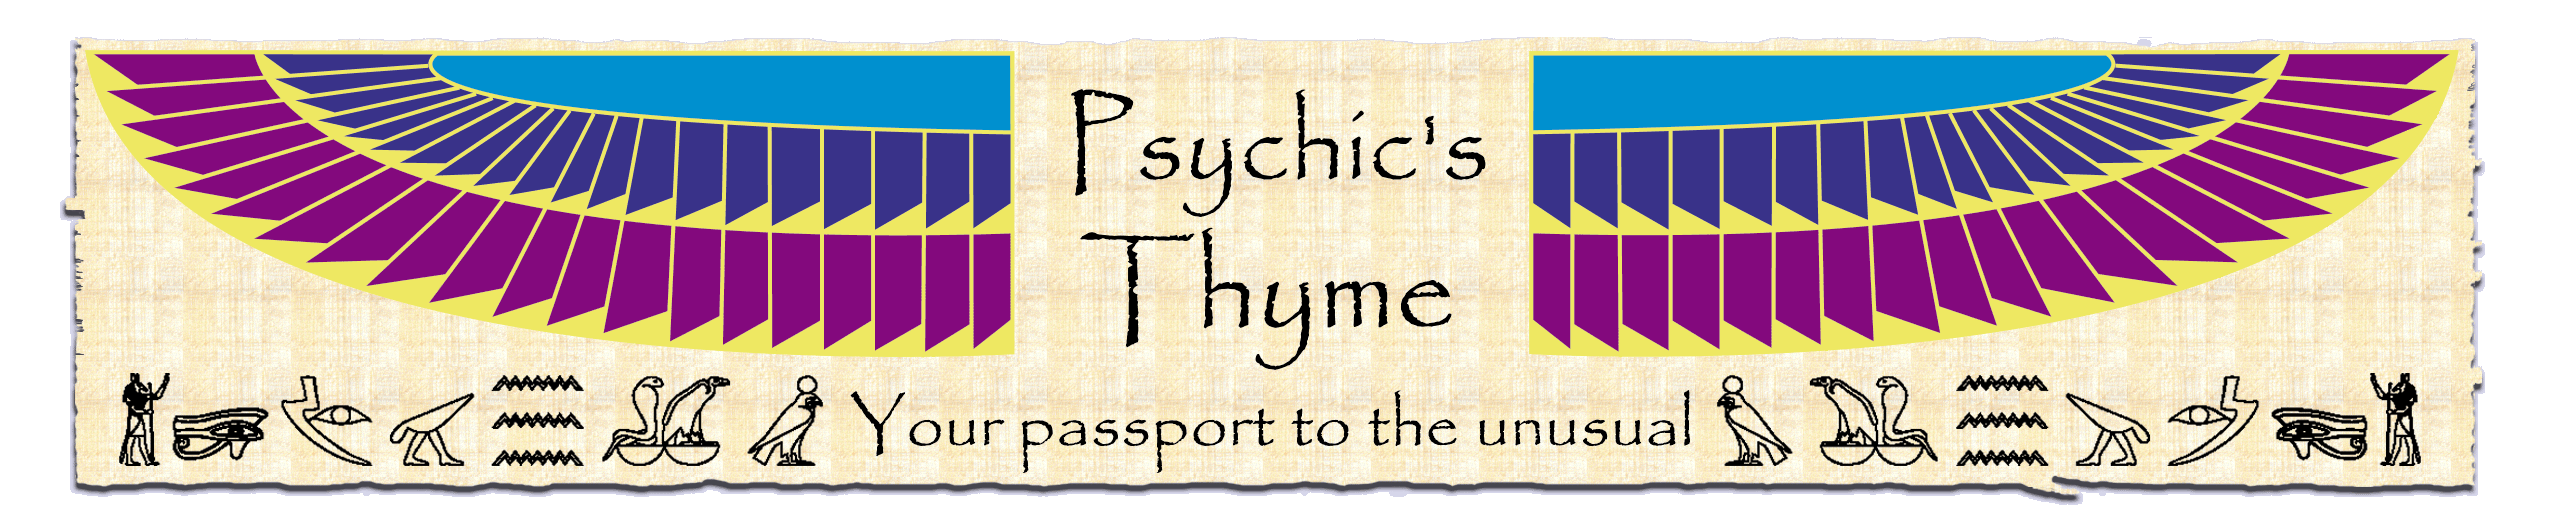 Psychic's Thyme